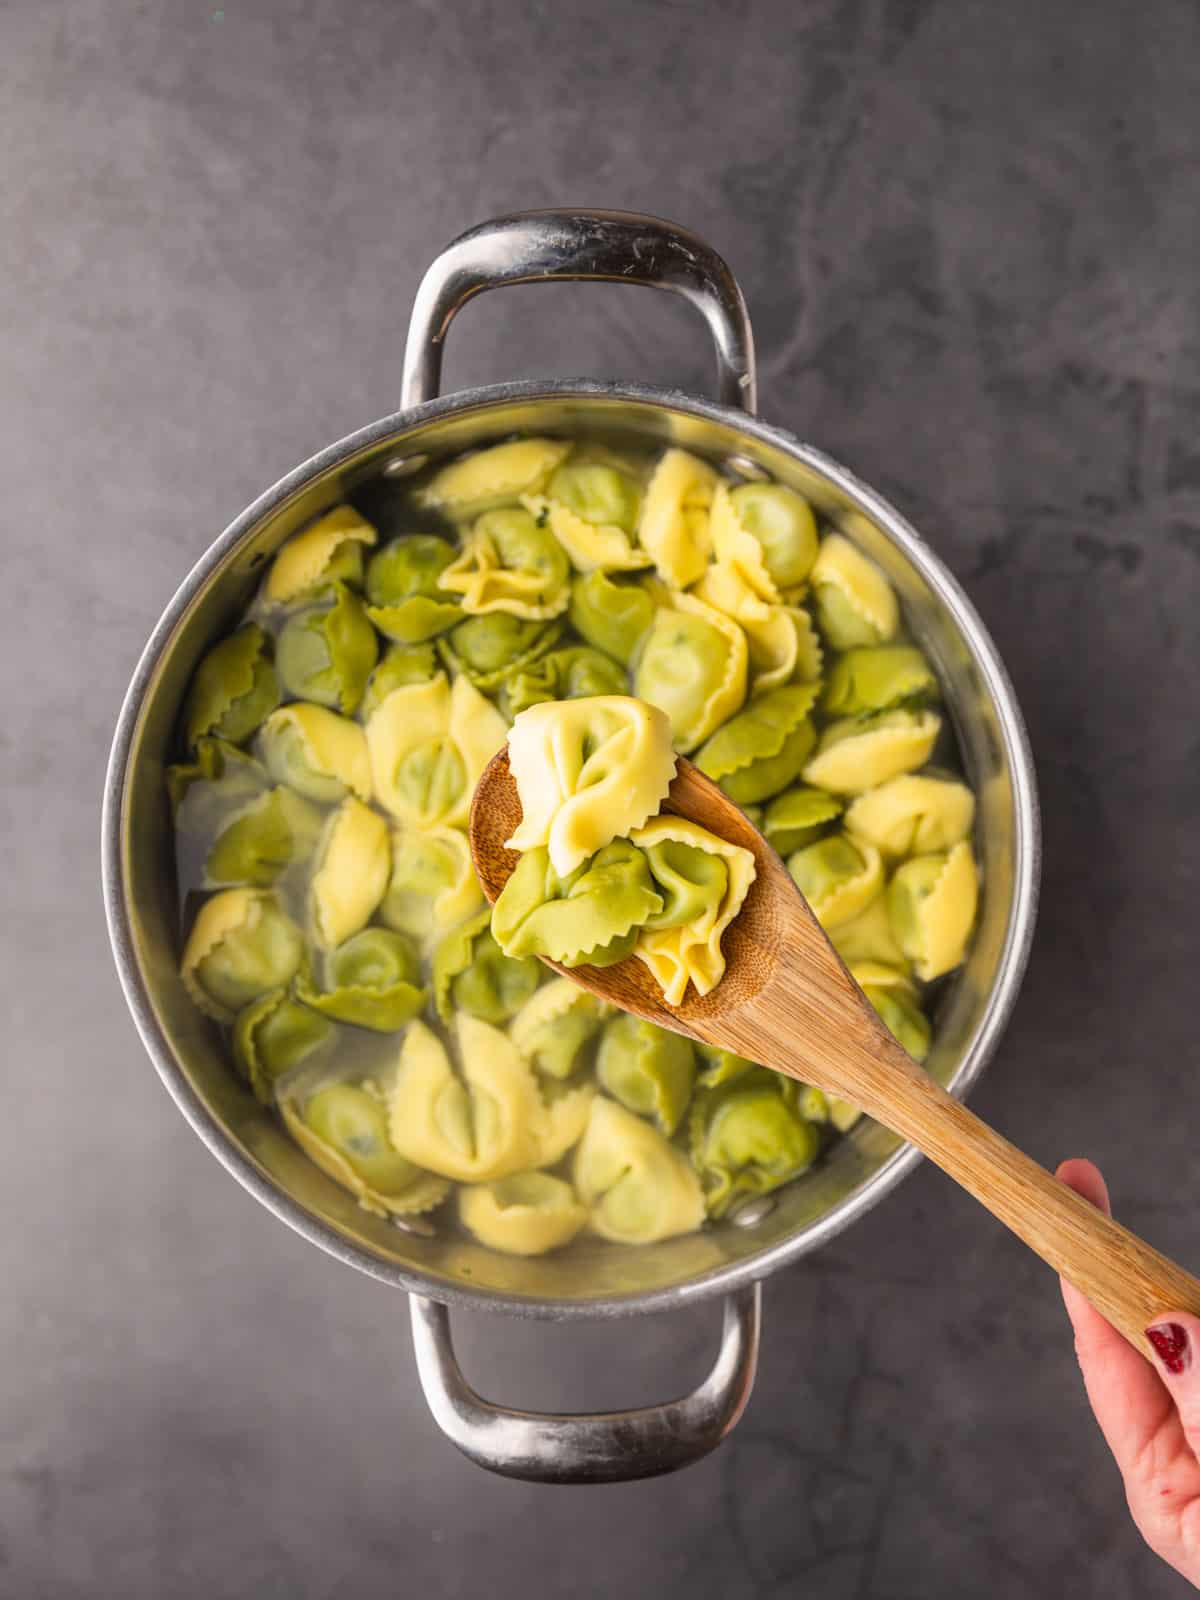 wooden spoon holding a few pieces of cooked spinach and cheese tortellini over a pot.